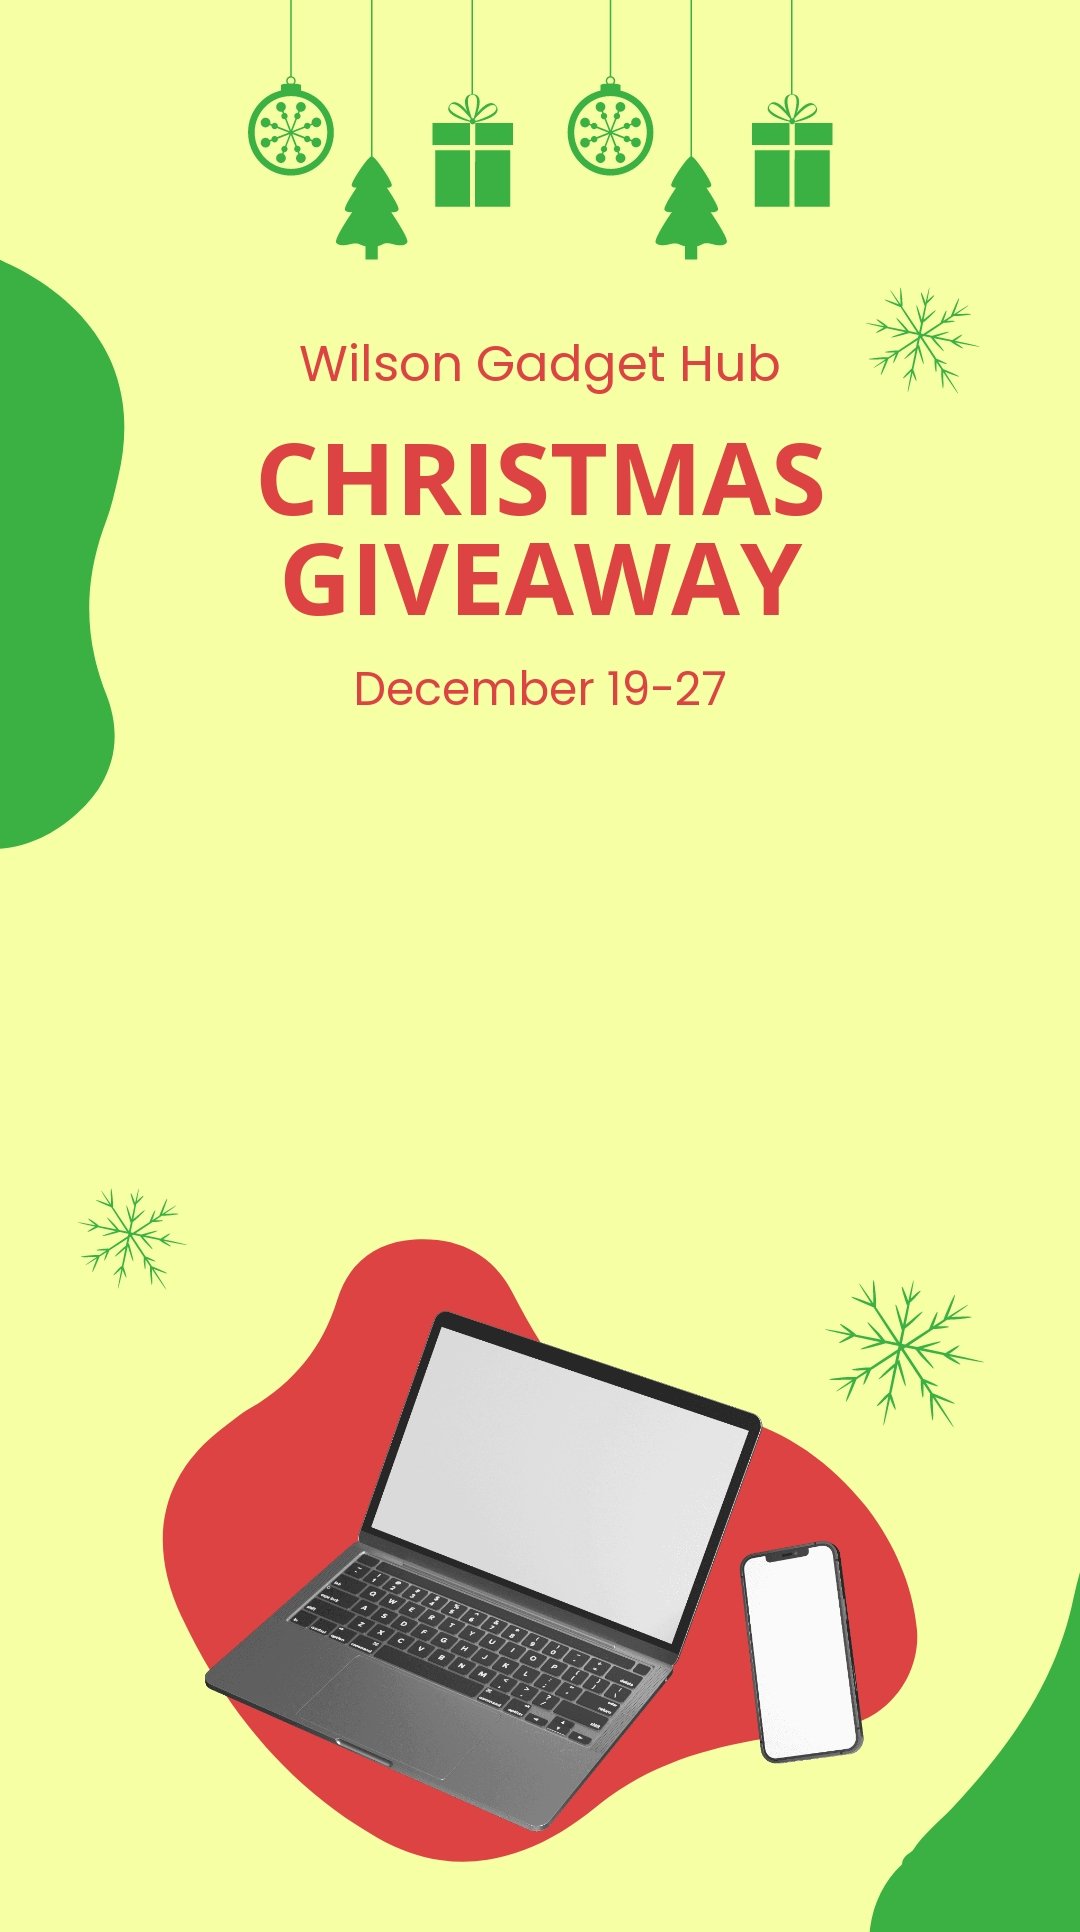 Free Christmas Giveaway Snapchat Geofilter Template